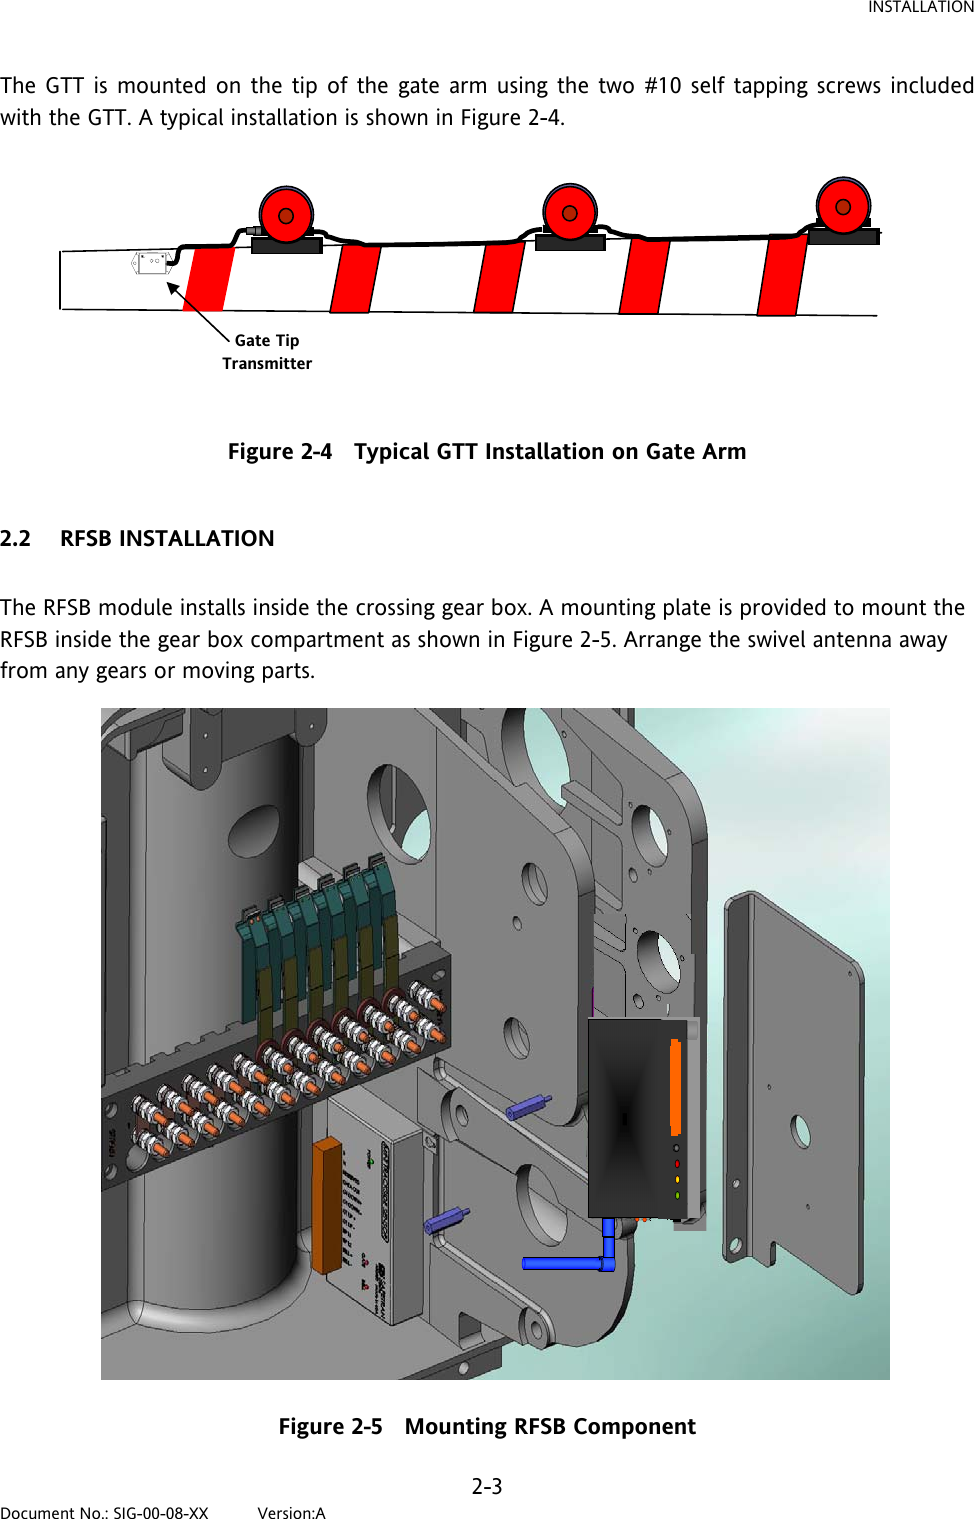 INSTALLATION The GTT is mounted on the tip of the gate arm using the two #10 self tapping screws included with the GTT. A typical installation is shown in Figure 2-4. Gate Tip Transmitter  Figure 2-4   Typical GTT Installation on Gate Arm  2.2 RFSB INSTALLATION  The RFSB module installs inside the crossing gear box. A mounting plate is provided to mount the RFSB inside the gear box compartment as shown in Figure 2-5. Arrange the swivel antenna away from any gears or moving parts.  Figure 2-5   Mounting RFSB Component 2-3 Document No.: SIG-00-08-XX          Version:A 